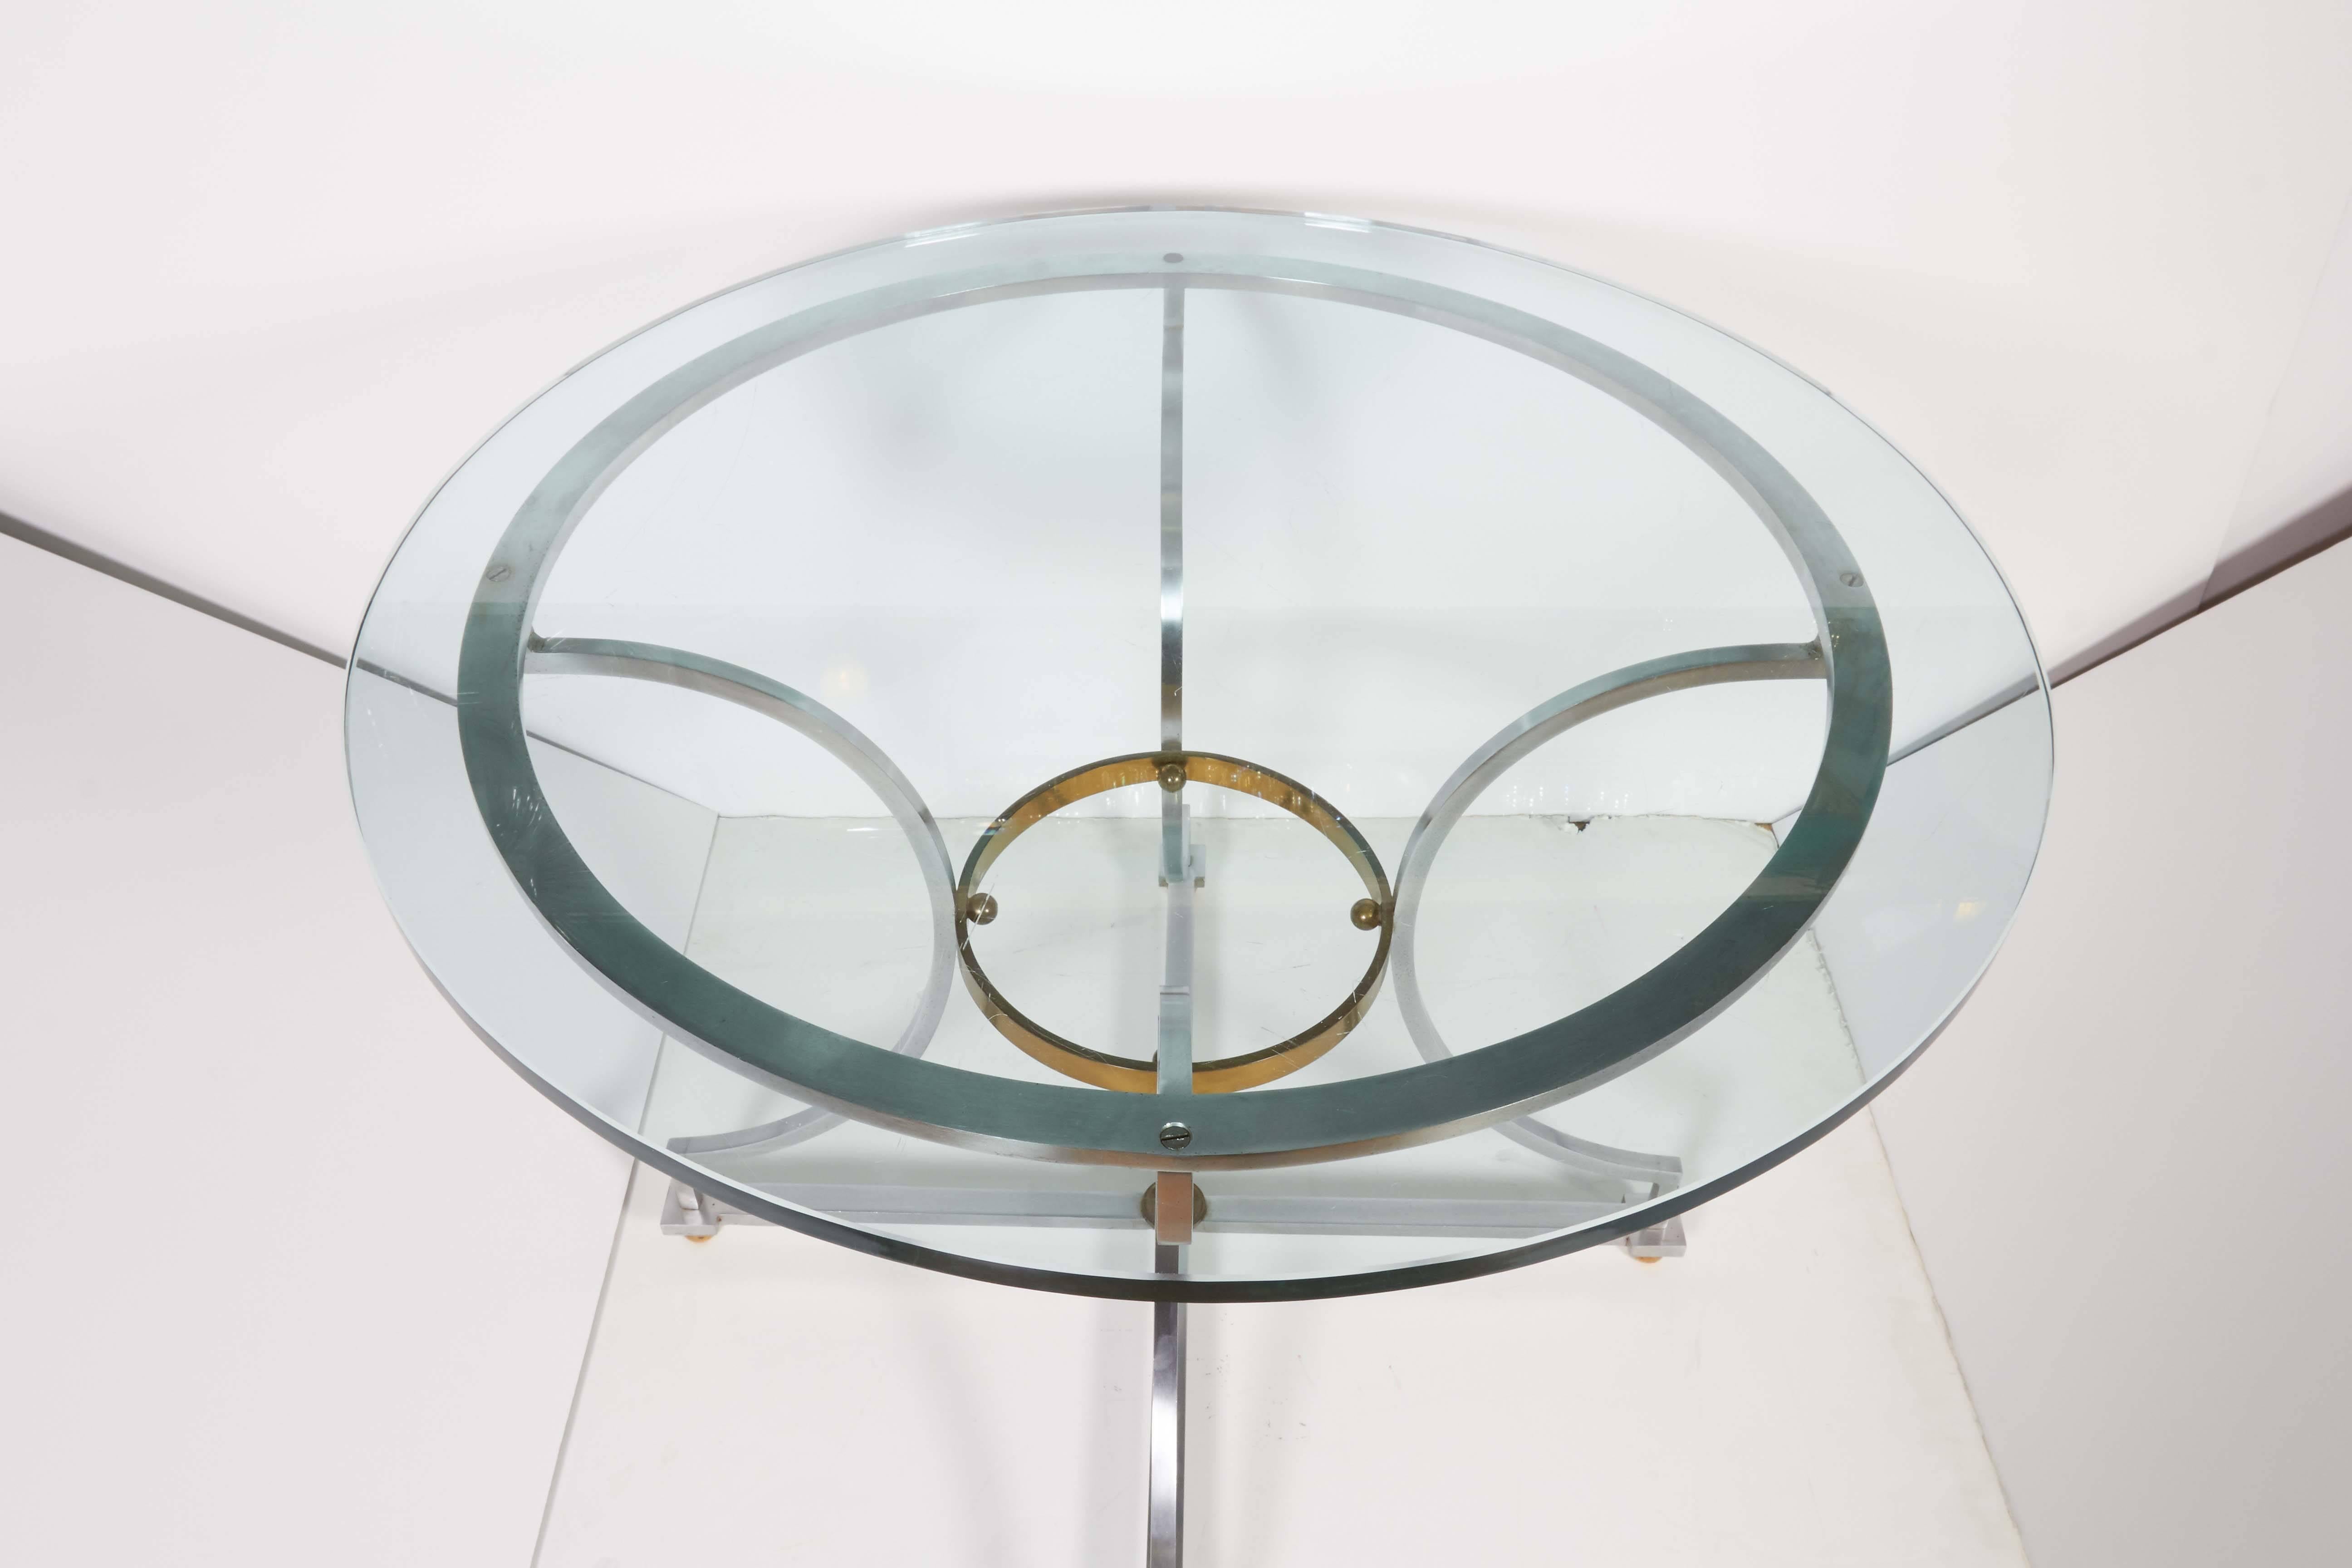 A vintage occasional table, designed in the manner of Maison Jansen, round glass on linear base comprised of brushed steel with brass accents. Measuring glass 3/4